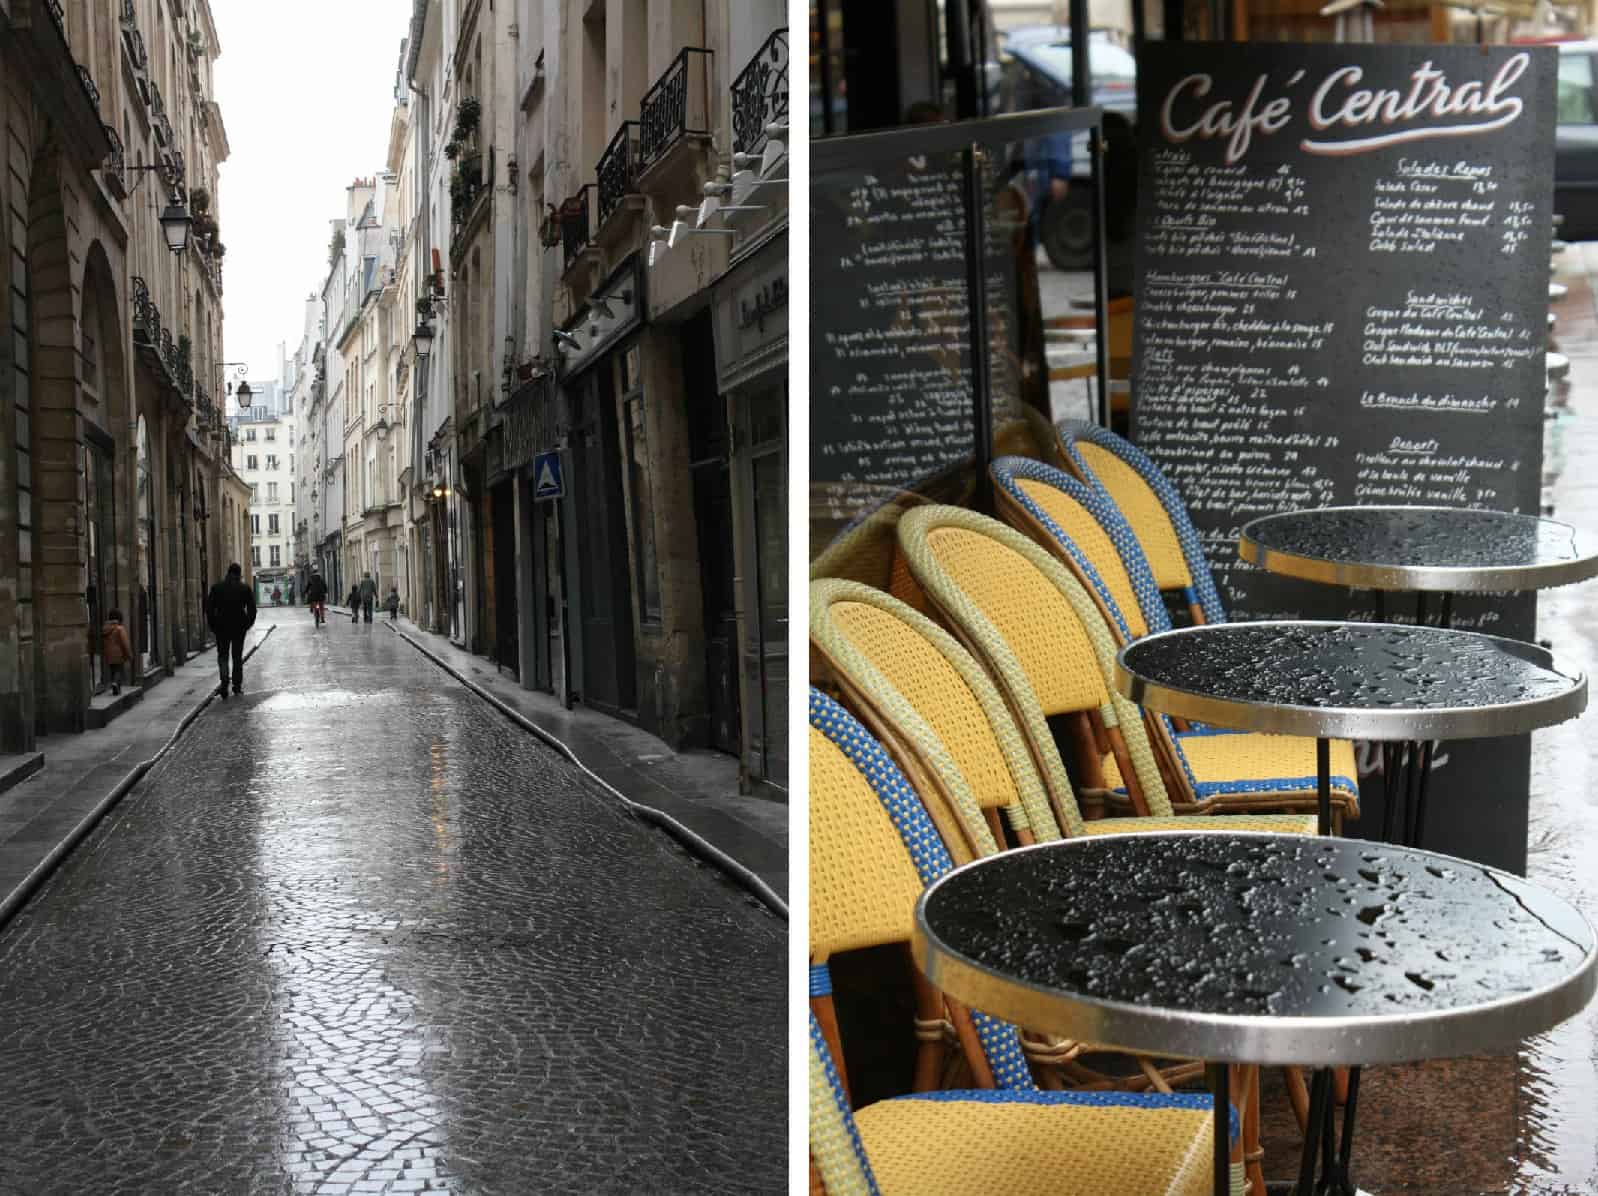 HiP Paris blog. Paris beneath a veil of rain. If you've ever wanted to feel like you have Paris all to yourself, go for a walk in the rain.